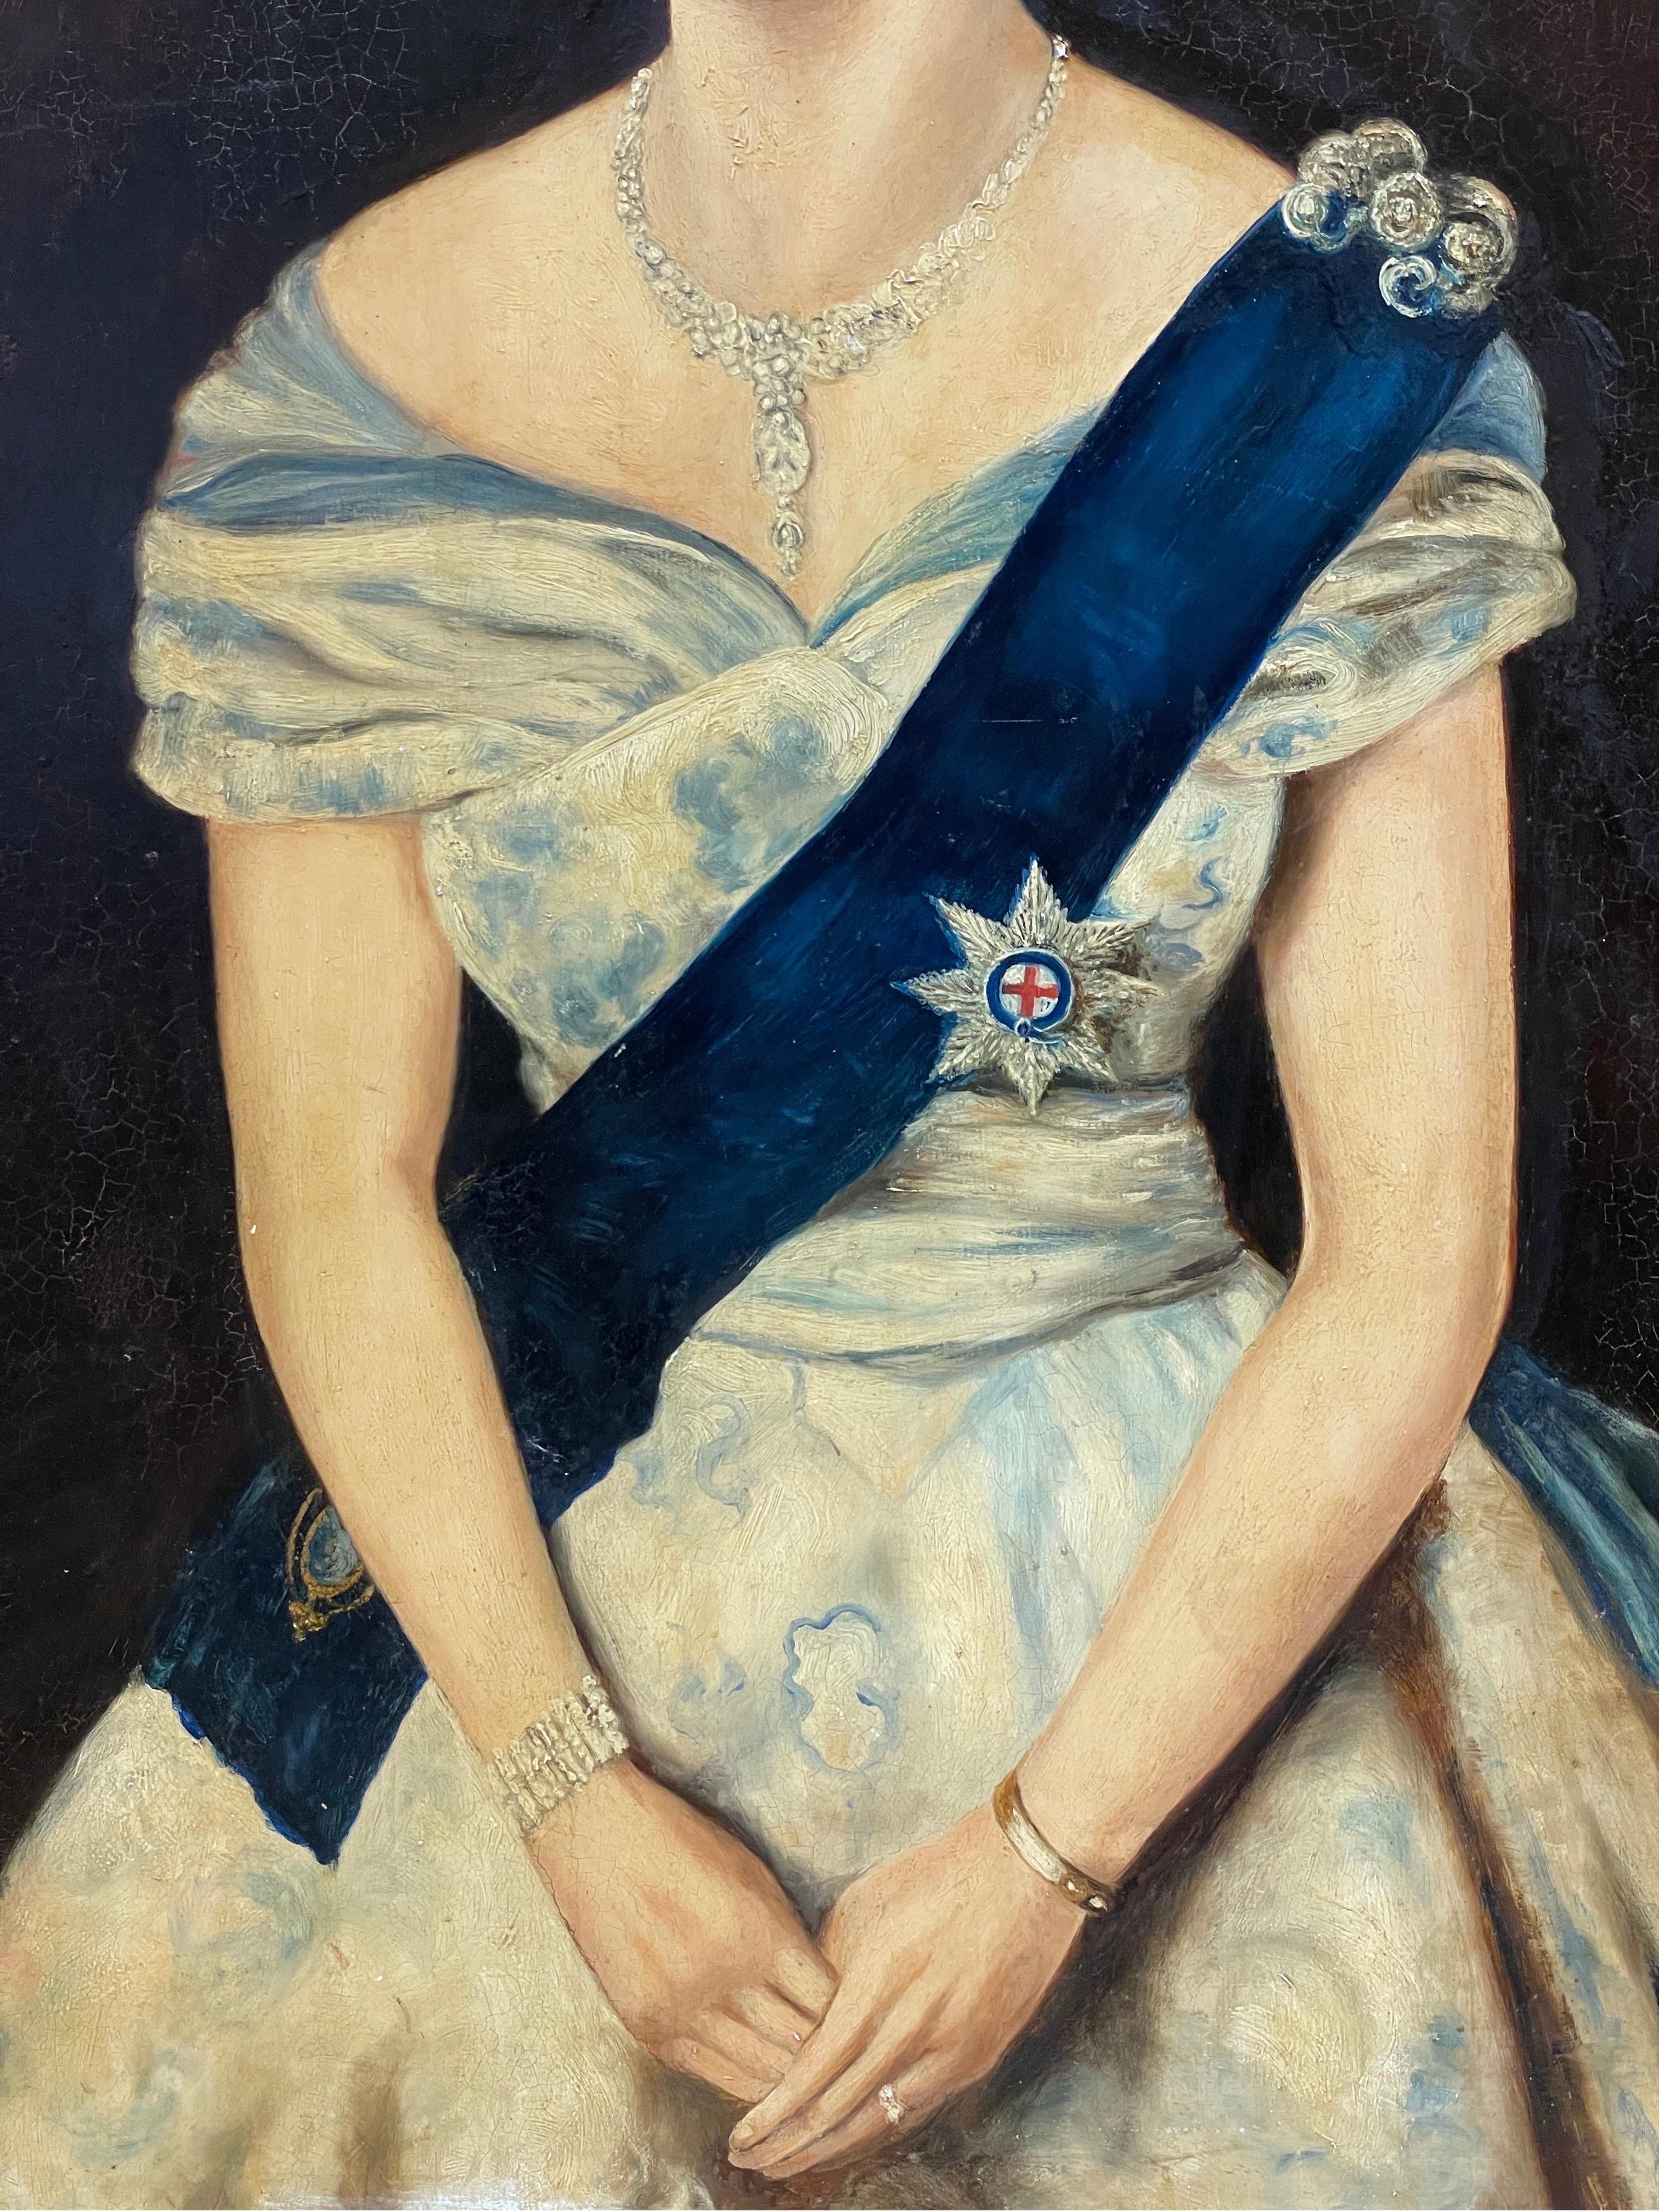 Her Majesty Queen Elizabeth II
by Paul Briscoe, (British), signed & dated 1953
oil painting on board, unframed
size: 40 x 30 inches
condition: overall very good and presentable. 
provenance: from a private collection in England
we can help arrange a